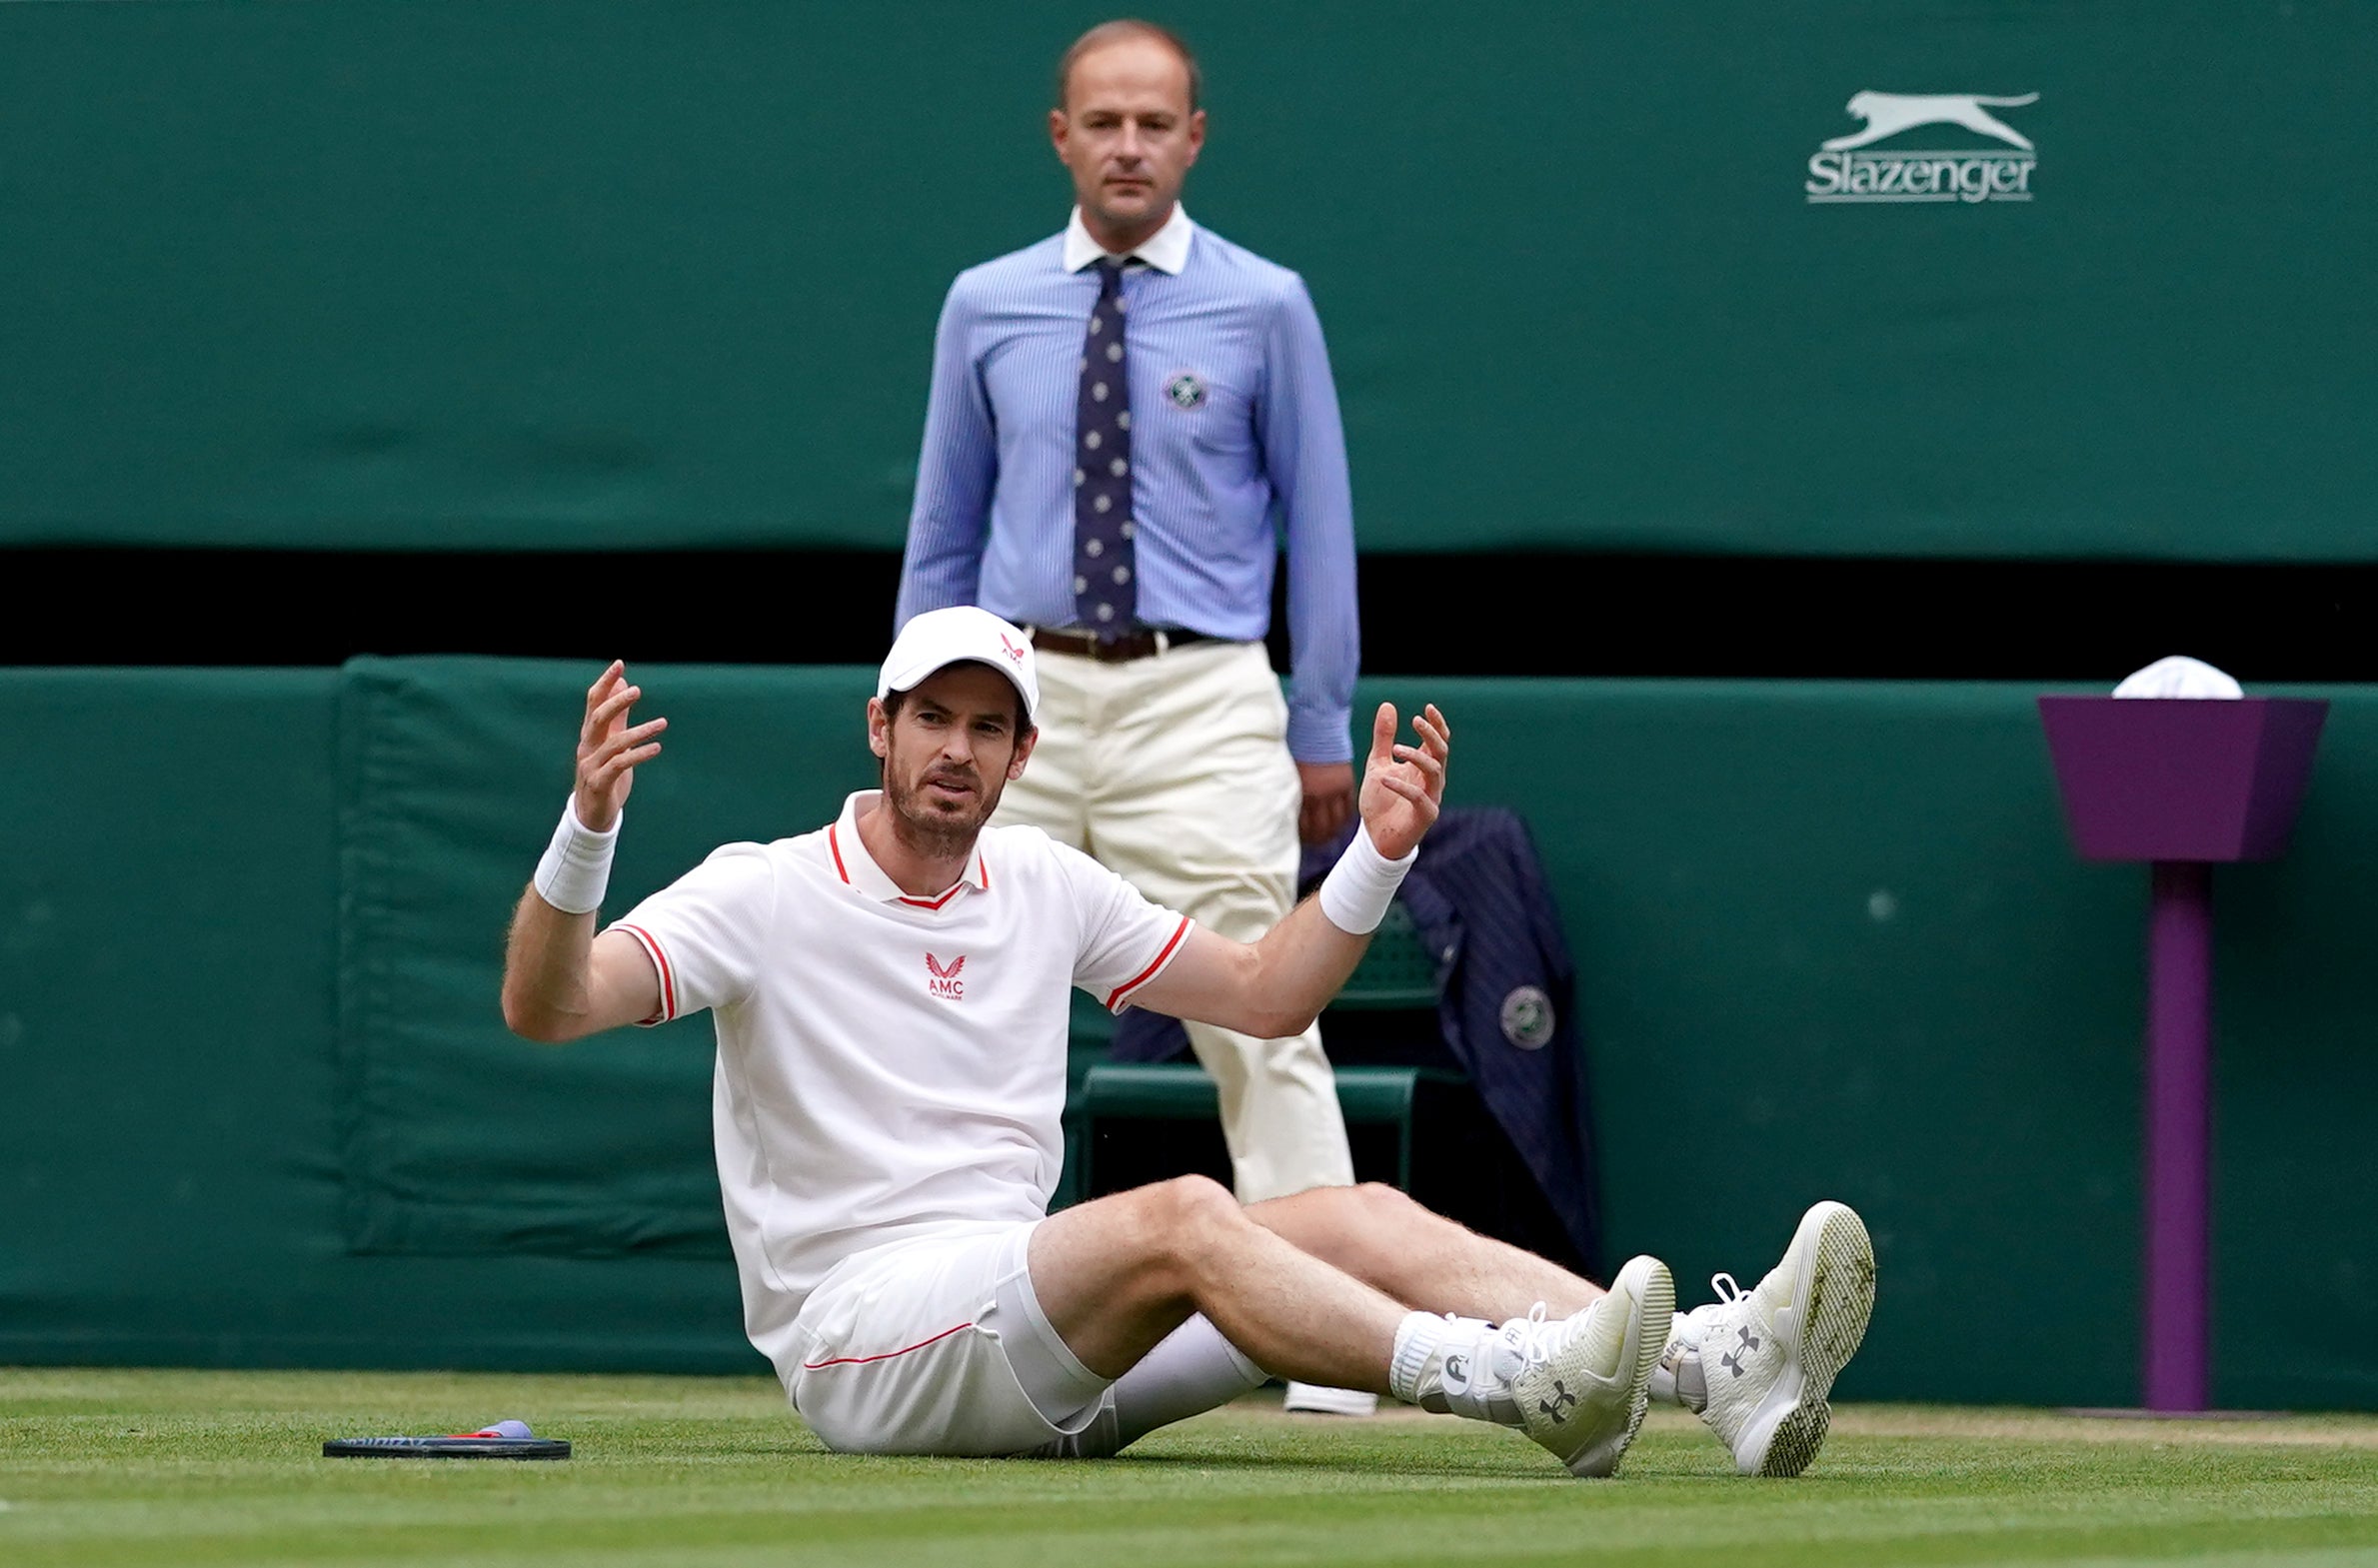 Andy Murray is out of Wimbledon after a third-round loss to Denis Shapovalov